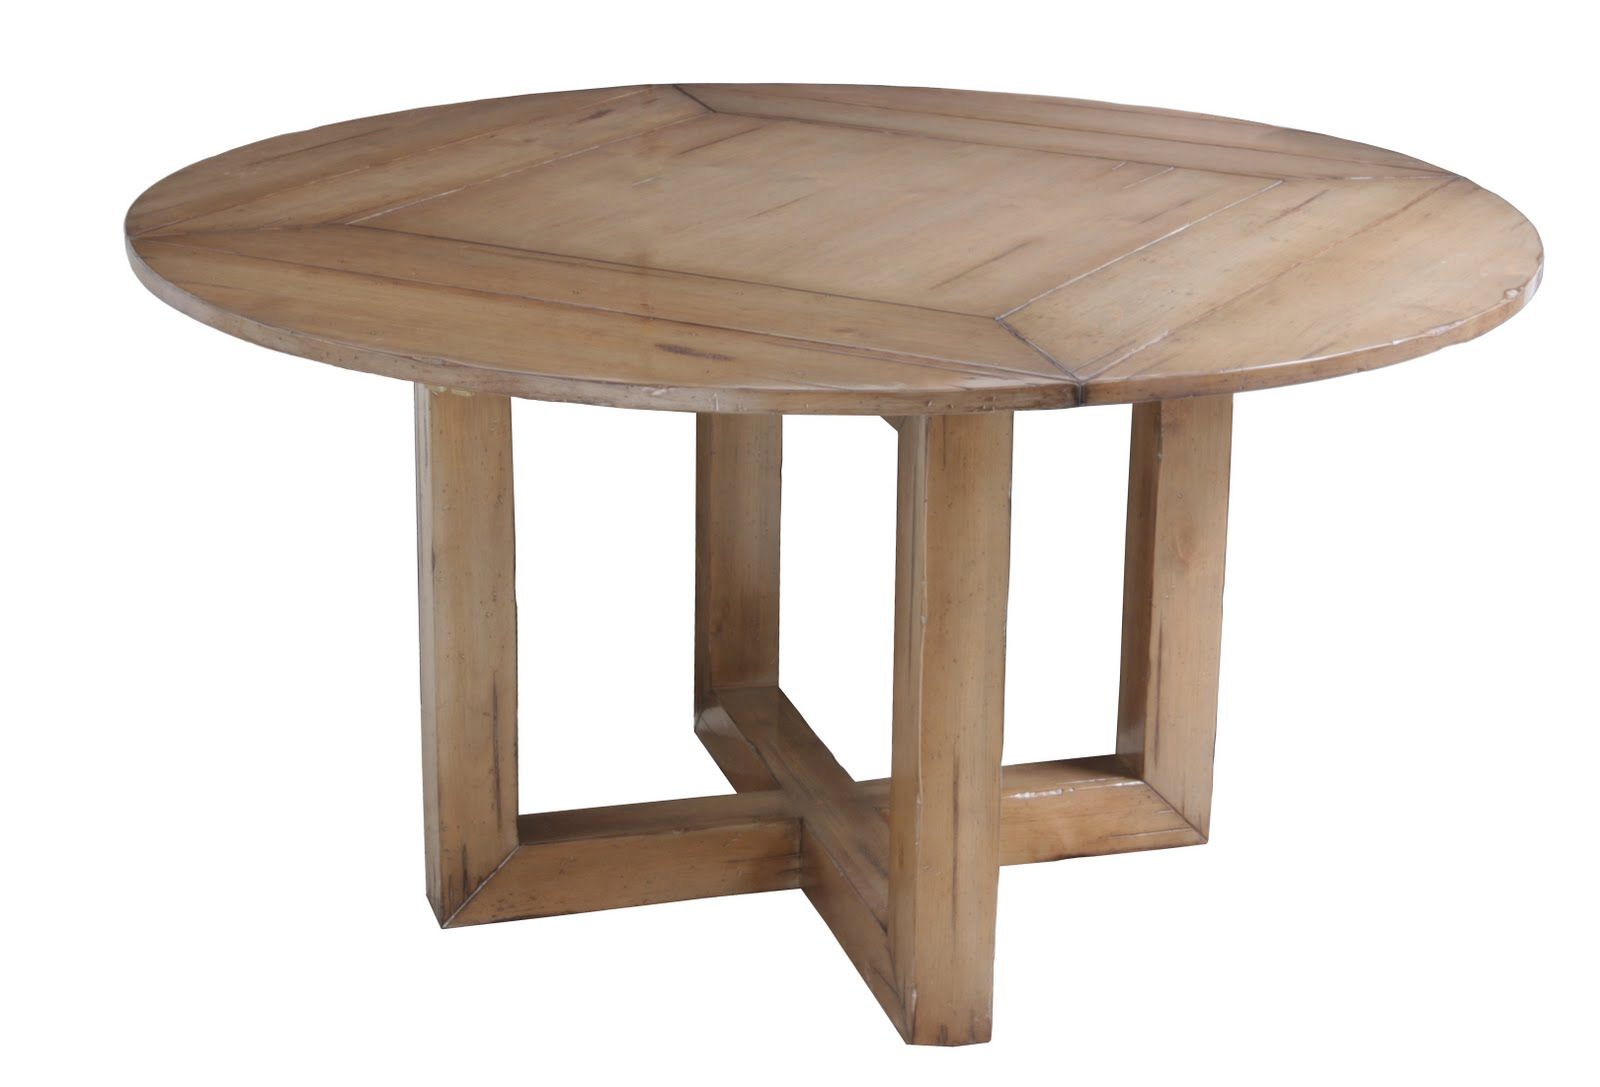 Square Type Of Legs Table